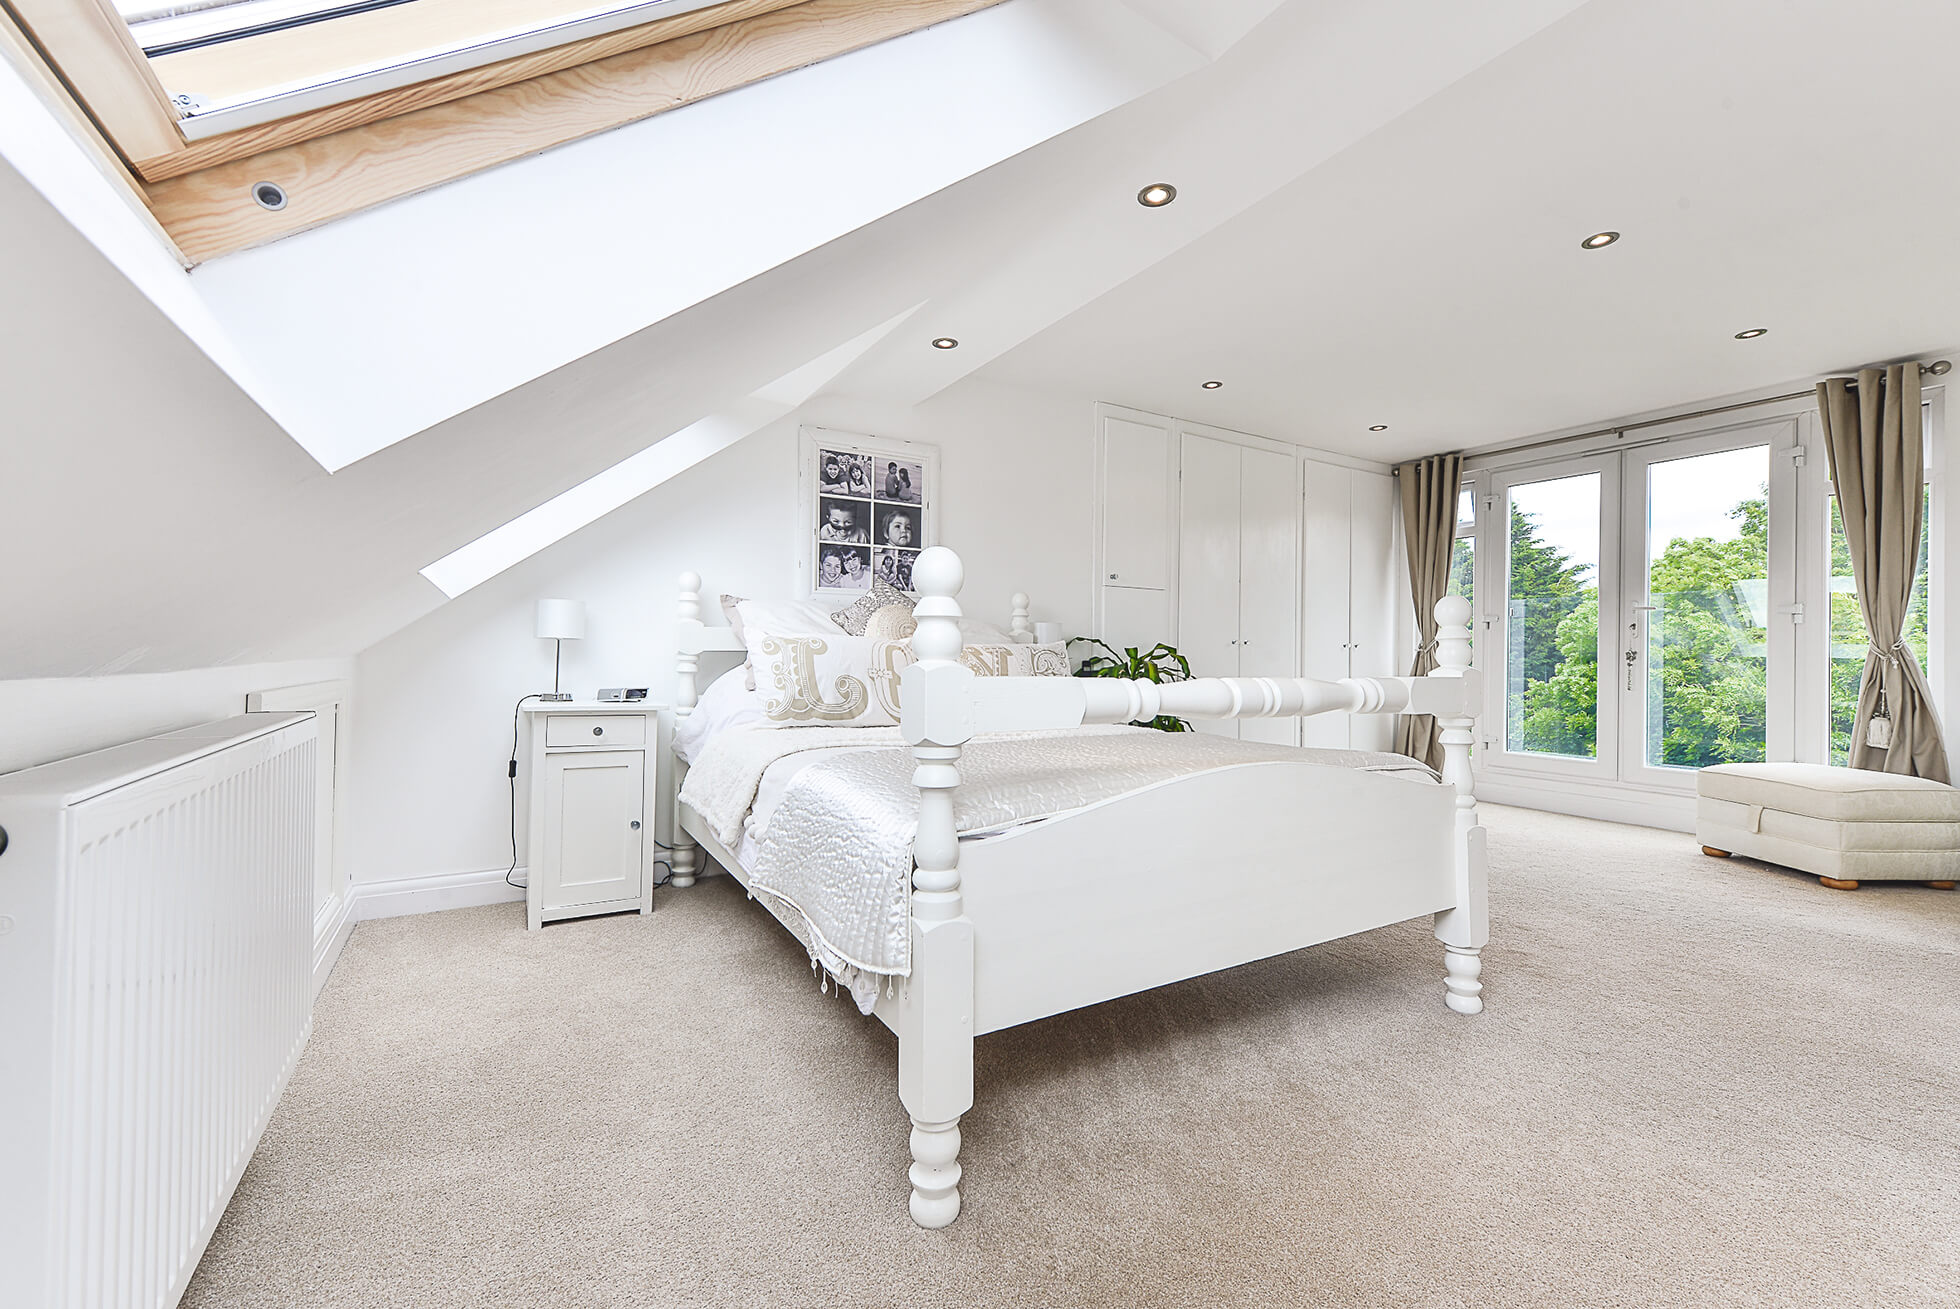 Do you have a question about converting your Loft in Ringshall? Here are the most popular questions asked by our clients.